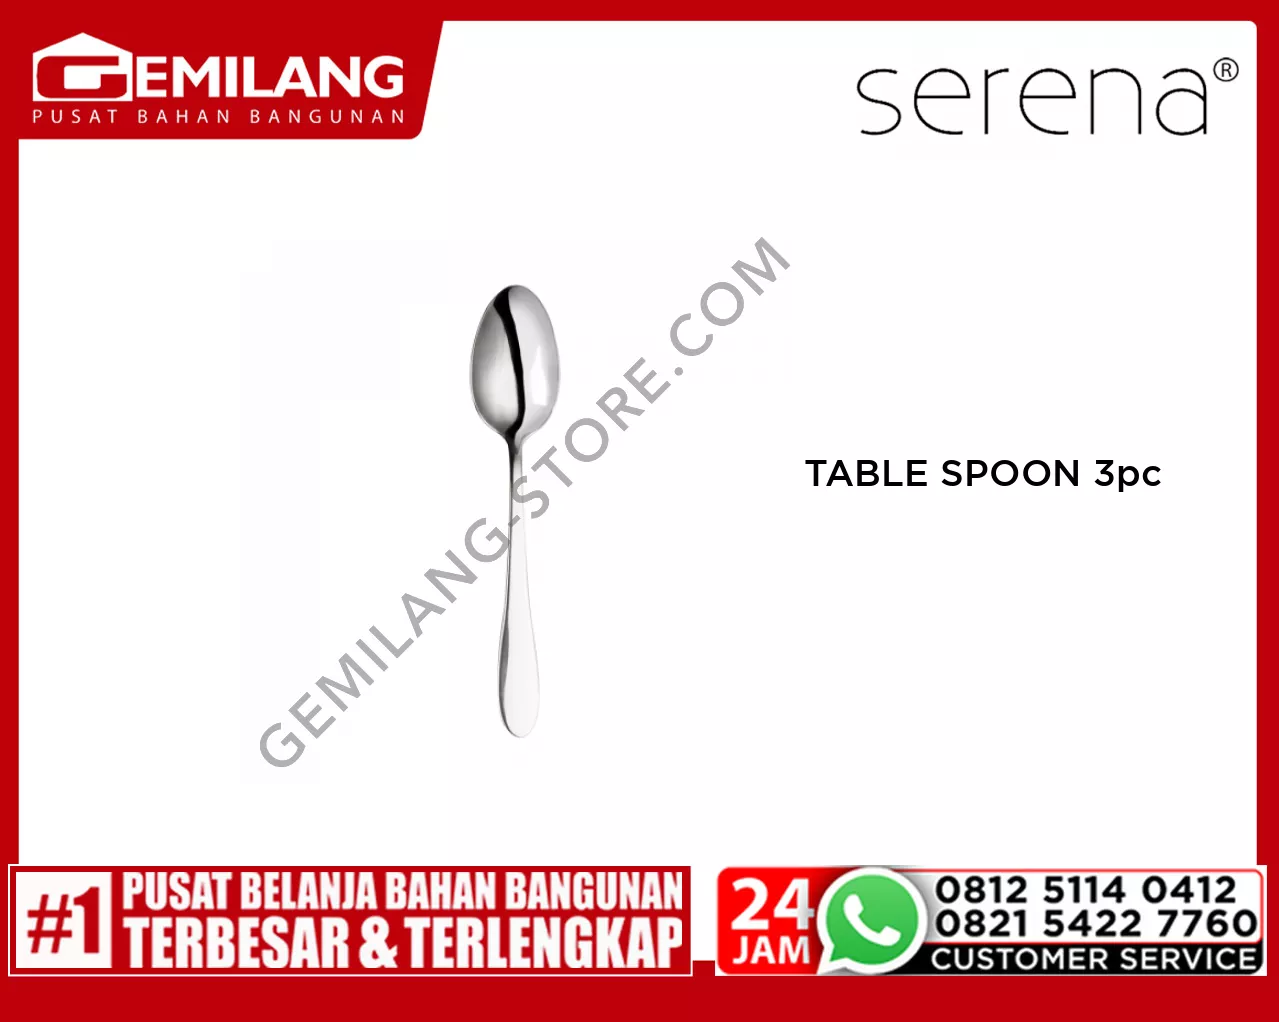 SERENA VANCOUVER TABLE SPOON YKVANCOUTBLSPN (3pc)